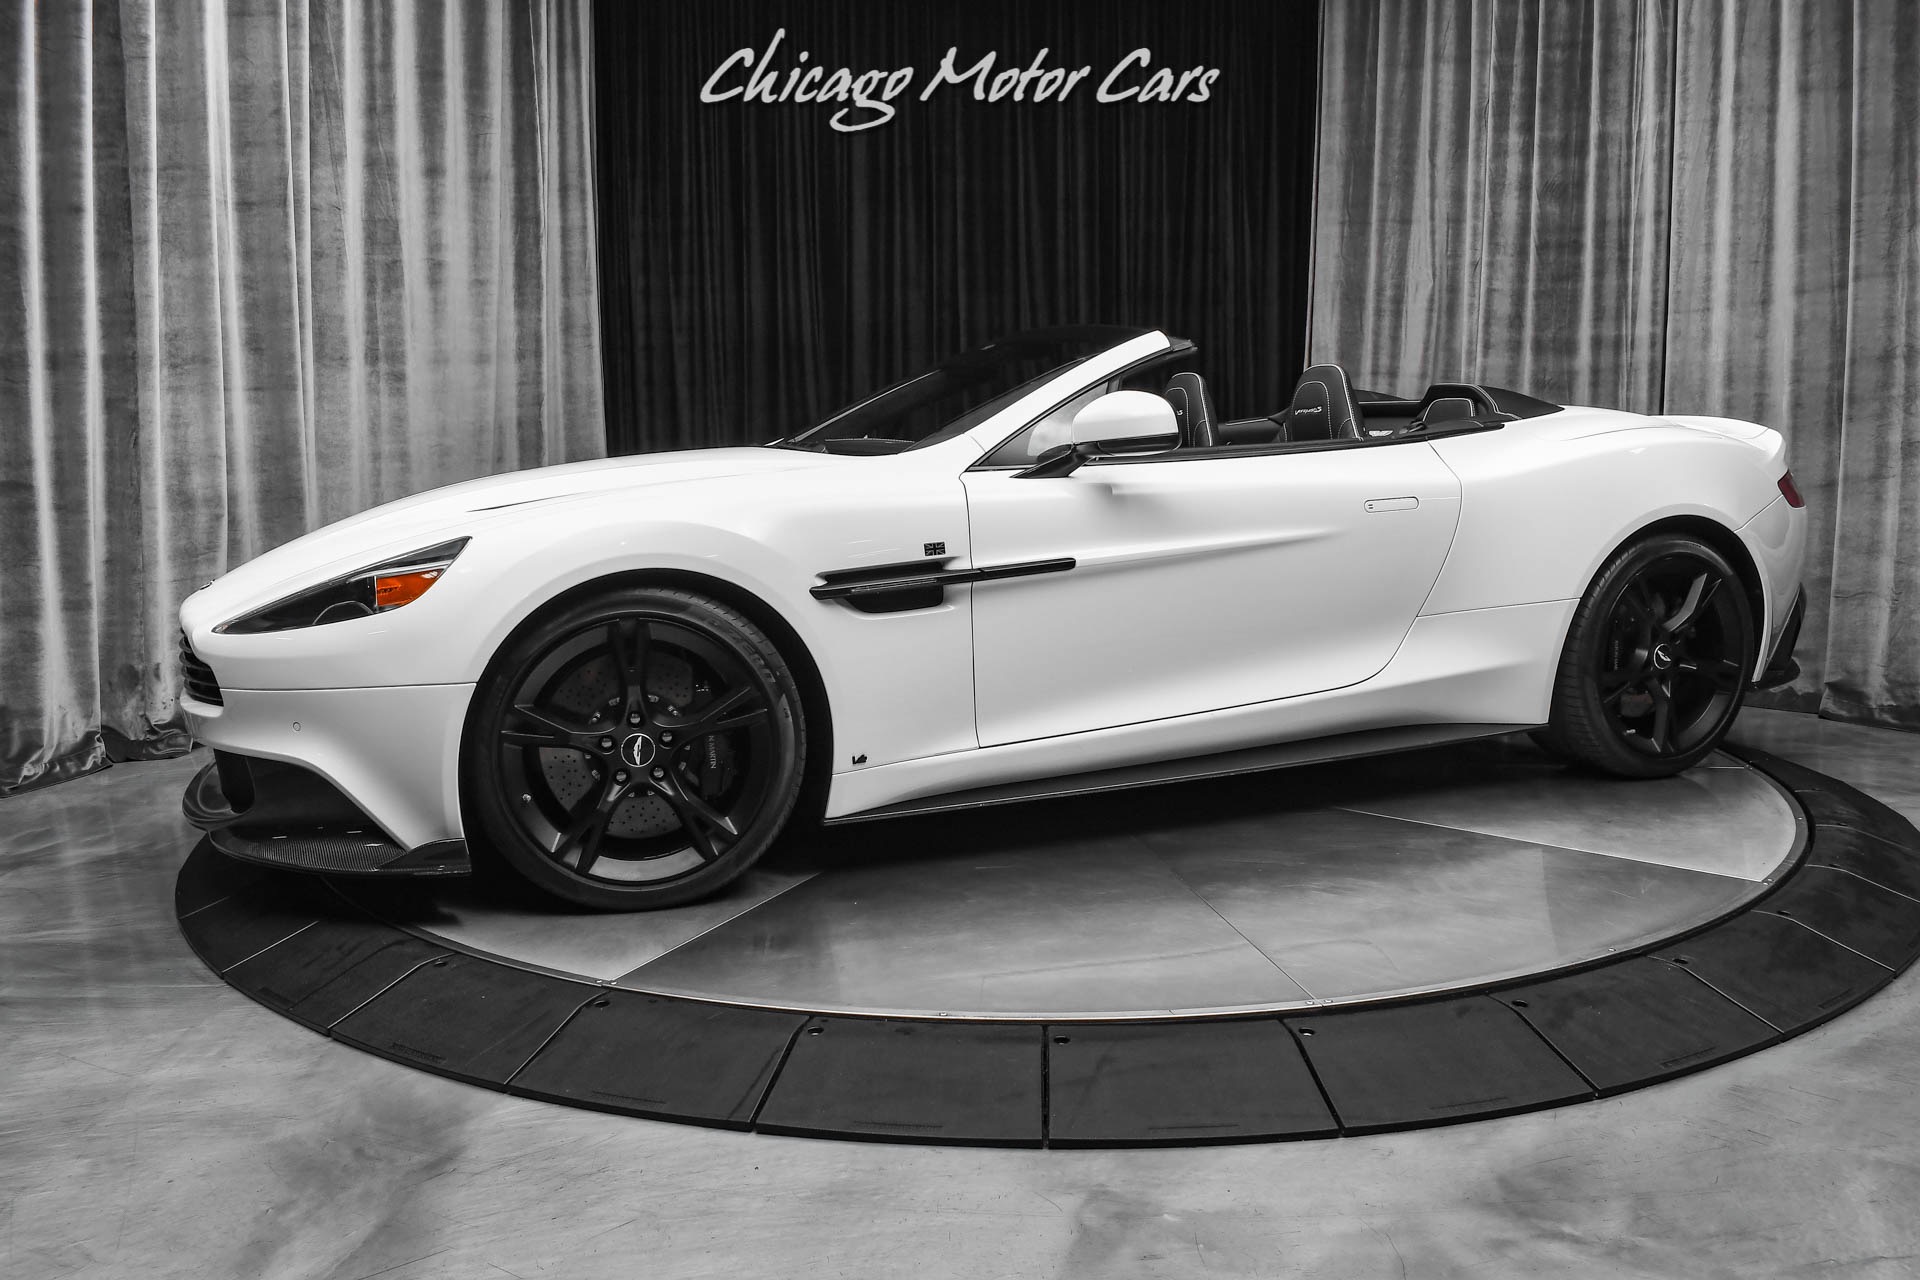 Used 2018 Aston Martin Vanquish S Volante $349k MSRP! Loaded with Carbon  Fiber! Only 6400 Miles! For Sale (Special Pricing) | Chicago Motor Cars  Stock #18262A